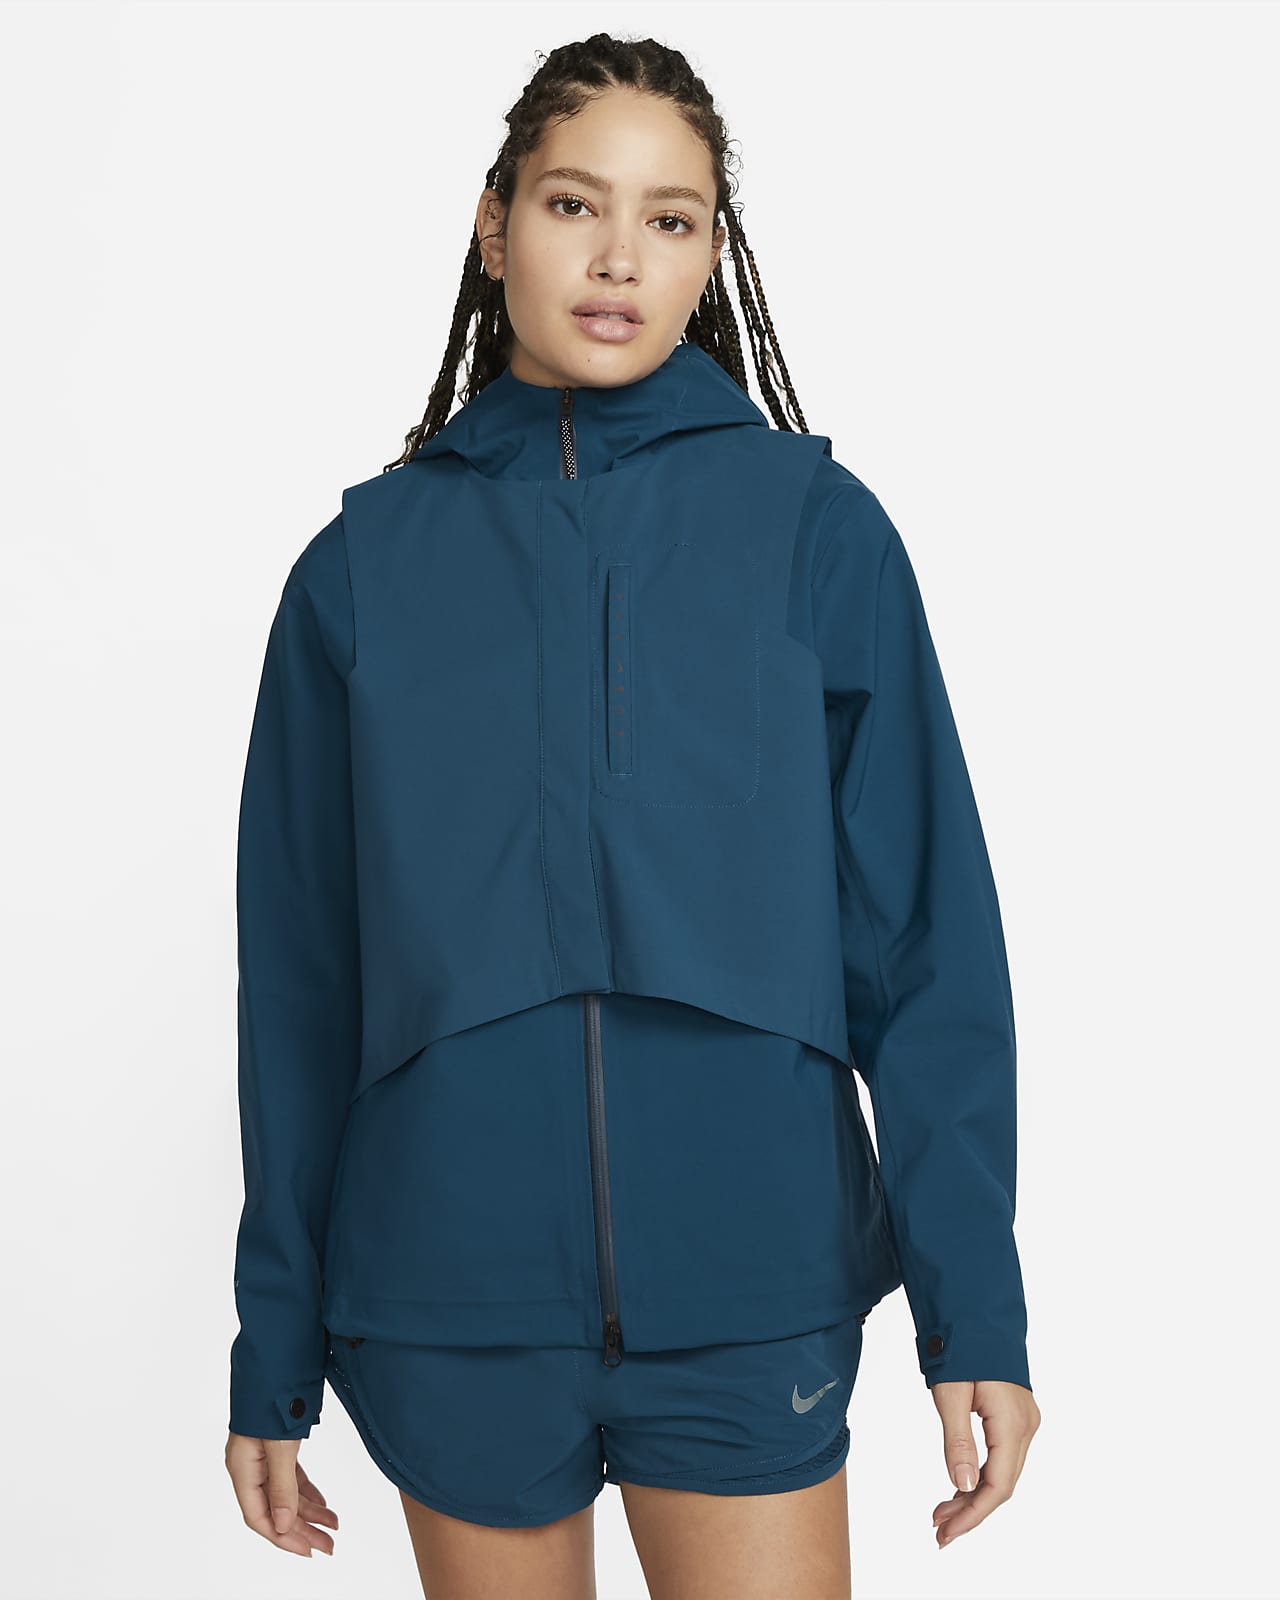 Nike Storm-FIT Run Division Women's Full-Zip Hooded Jacket